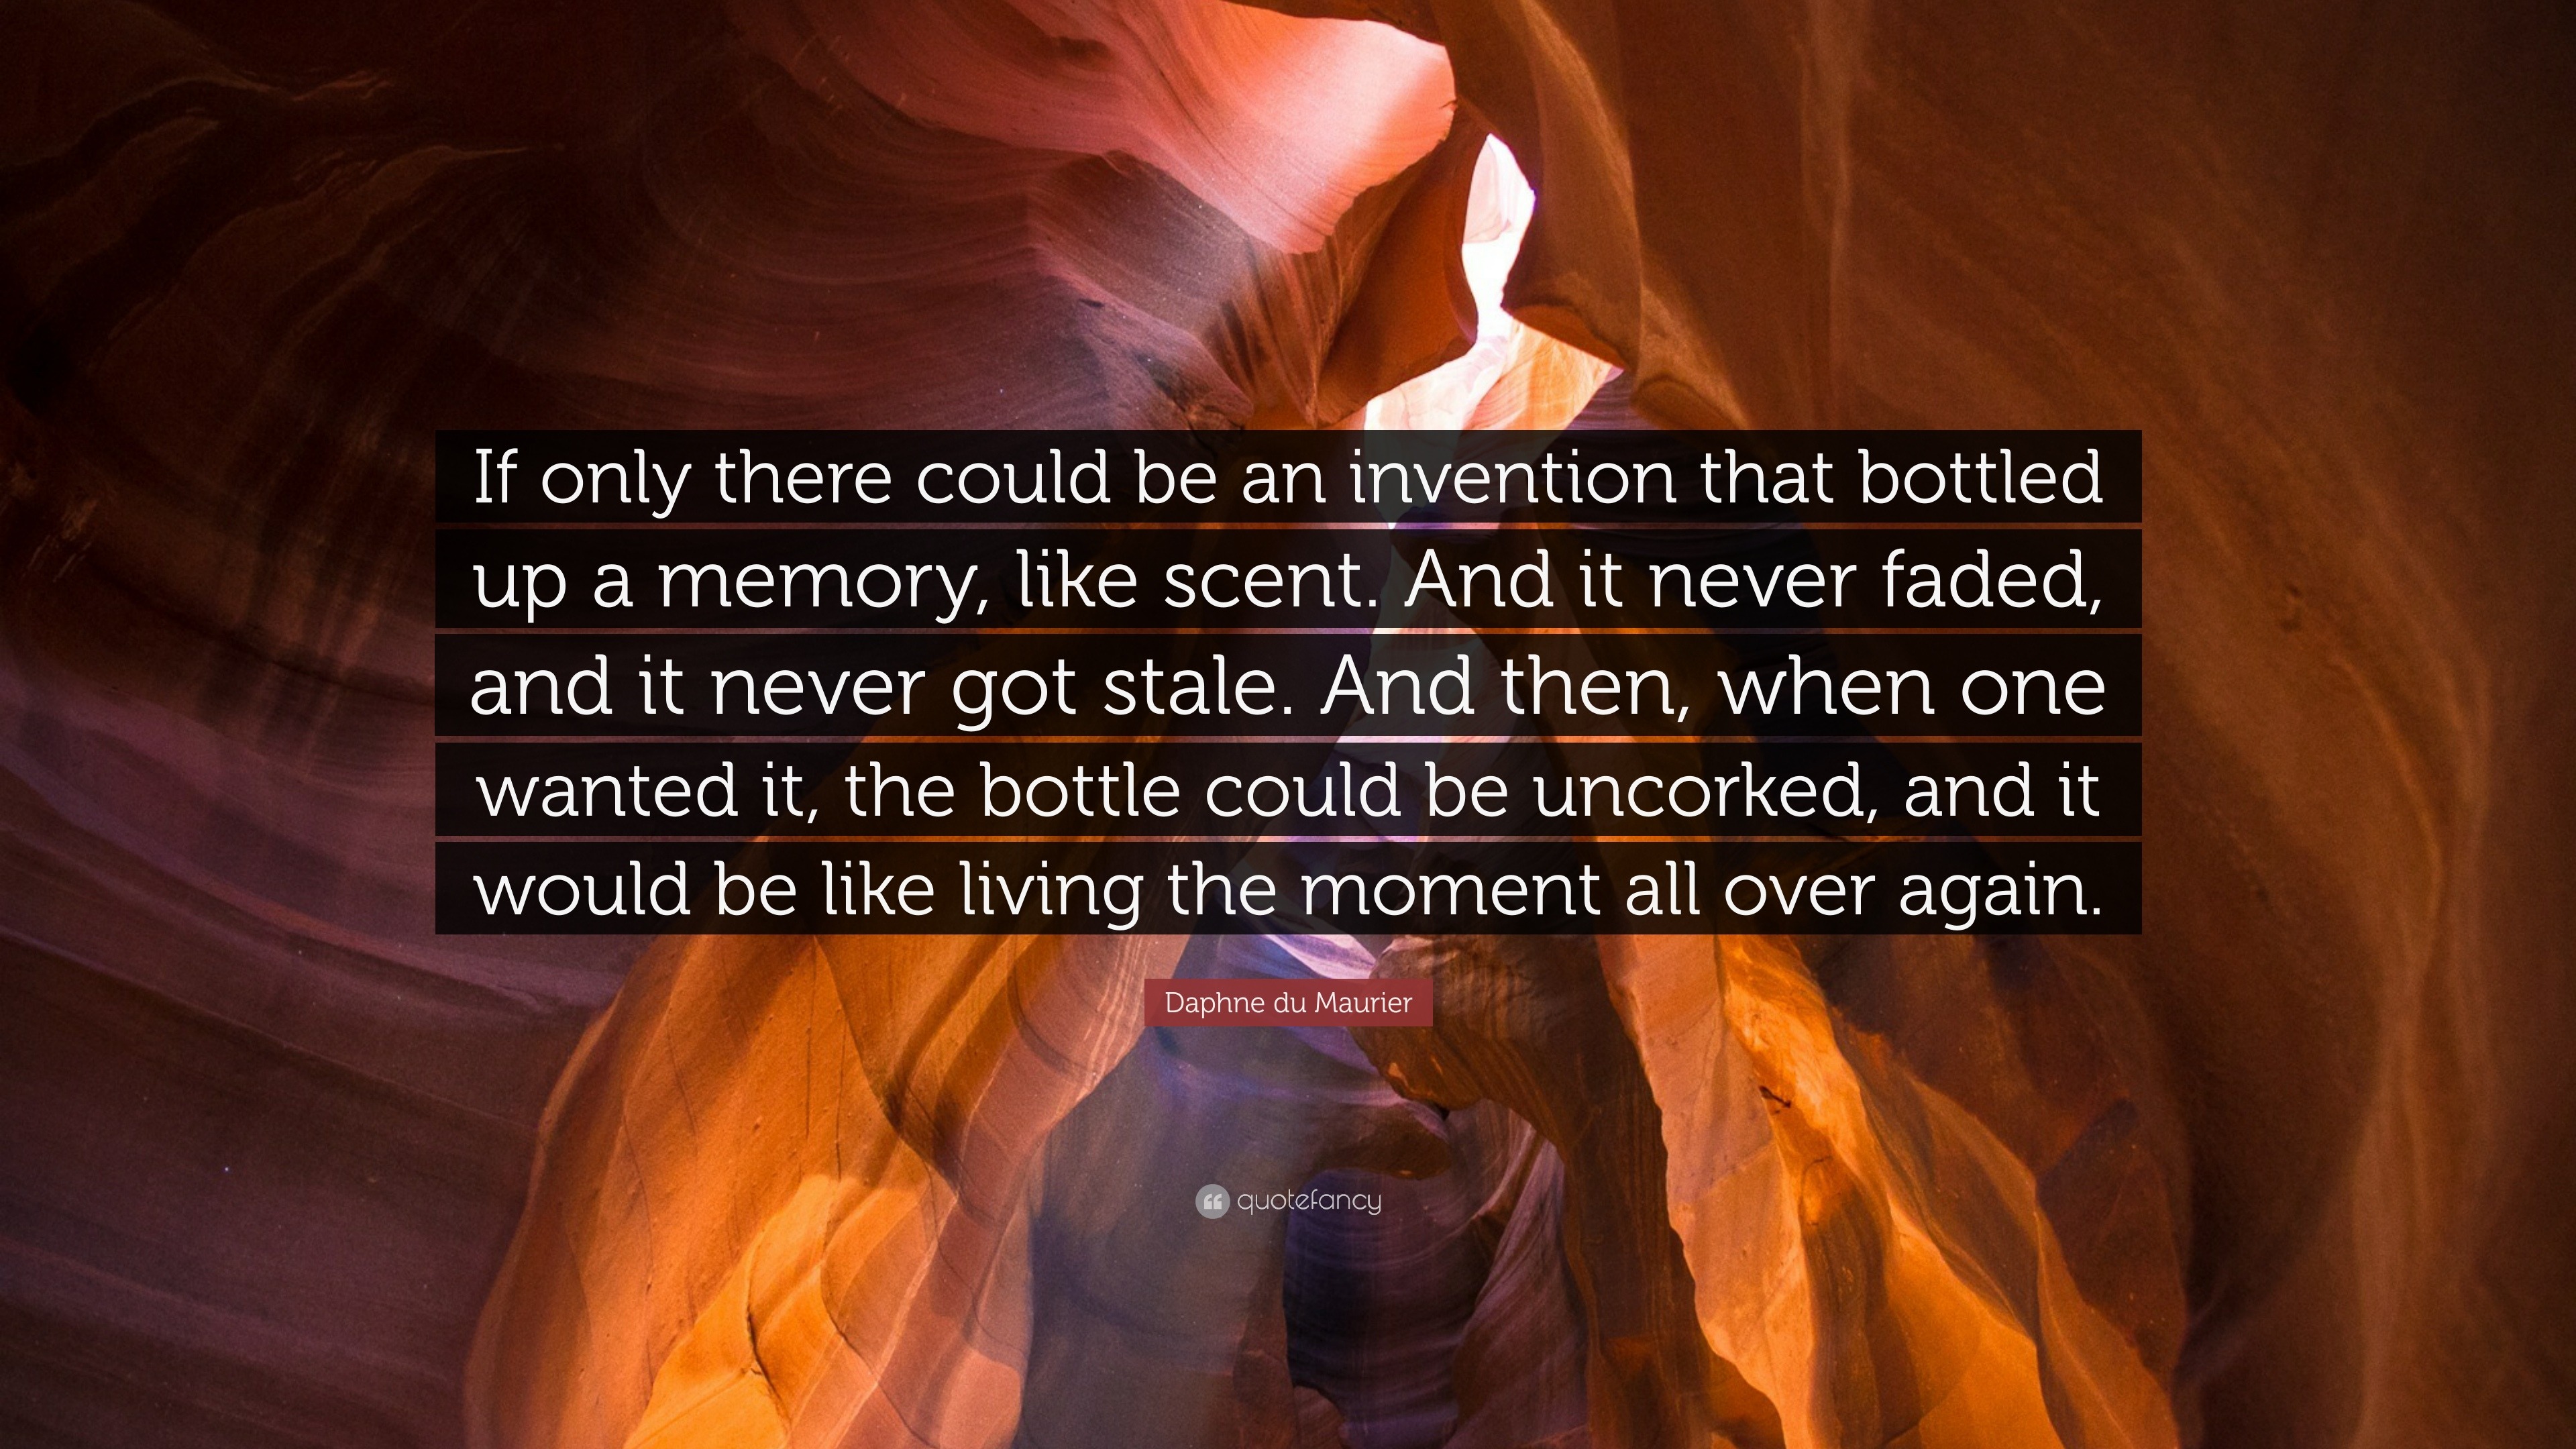 Daphne du Maurier Quote: “If only there could be an invention that